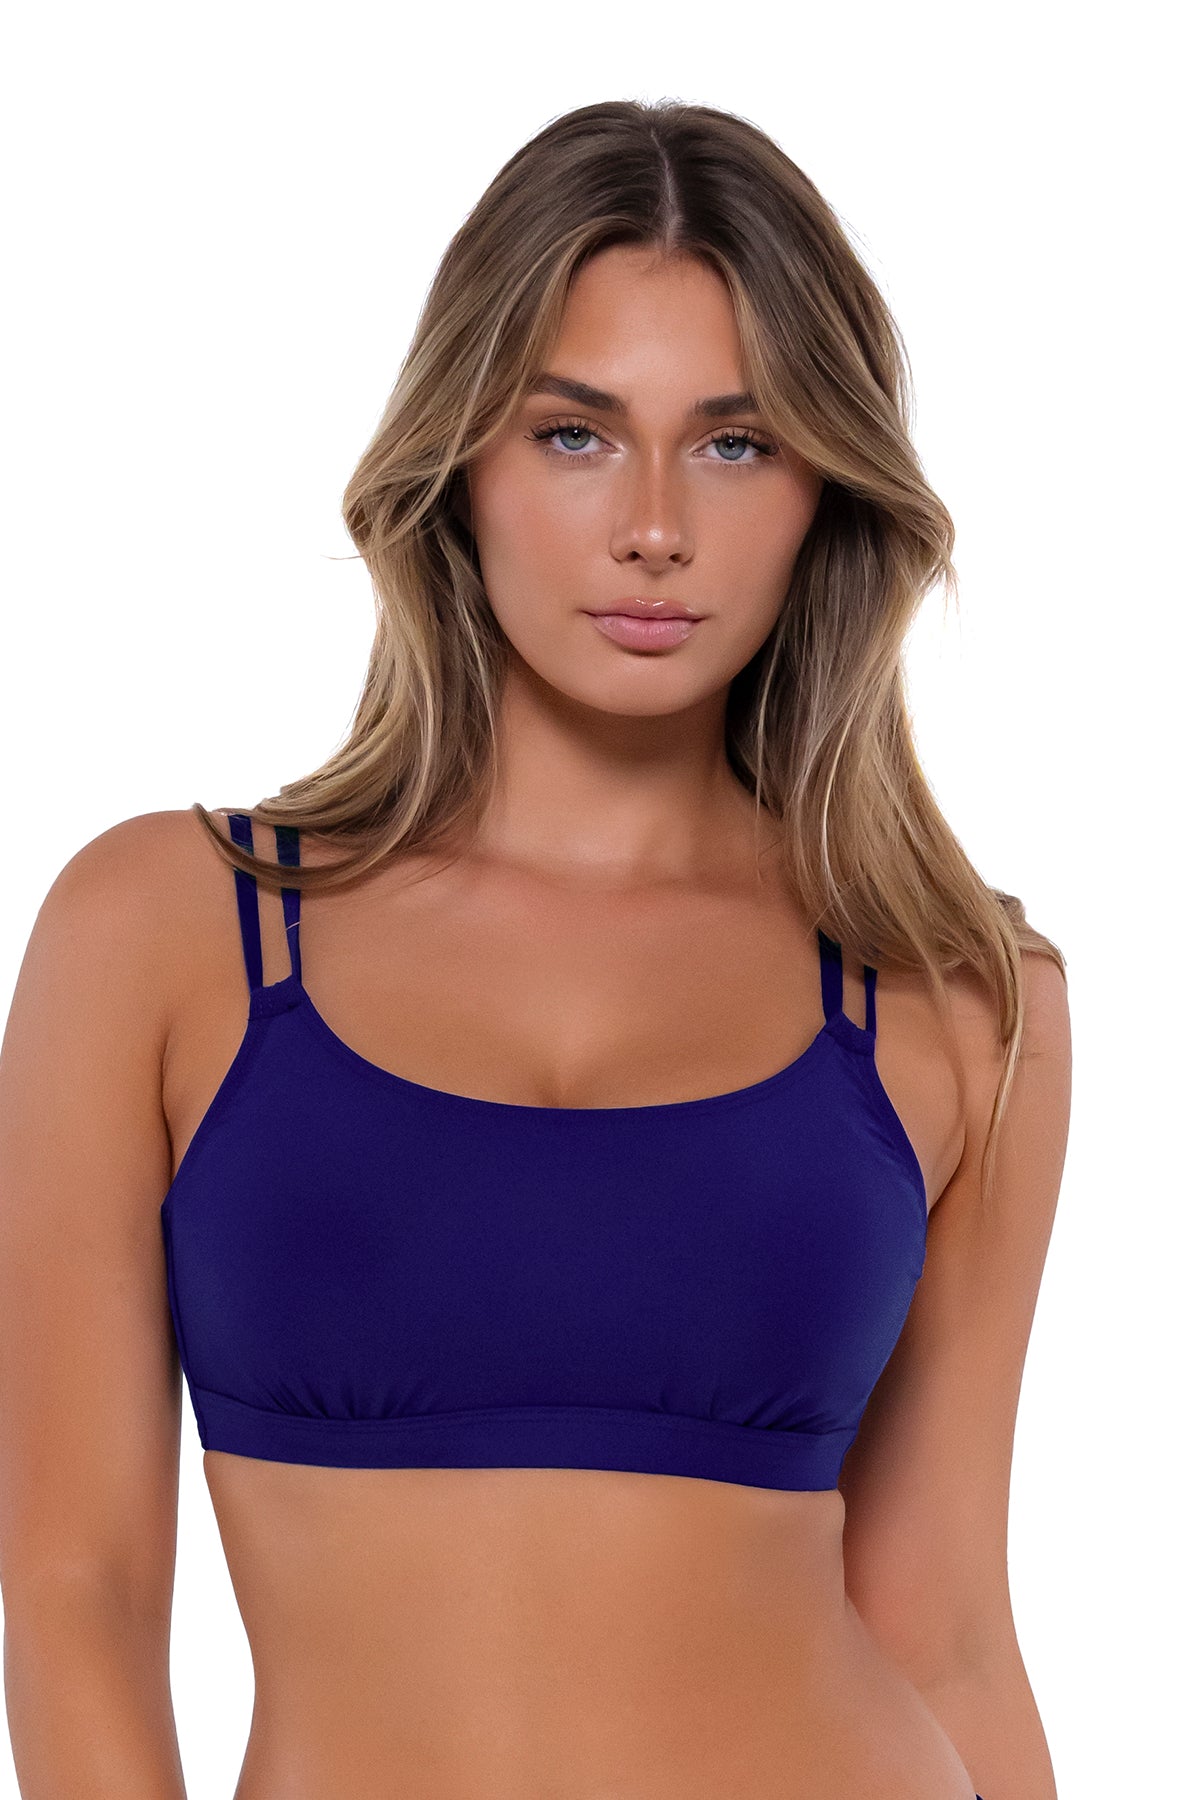 Front pose #3 of Taylor wearing Sunsets Indigo Taylor Bralette Top